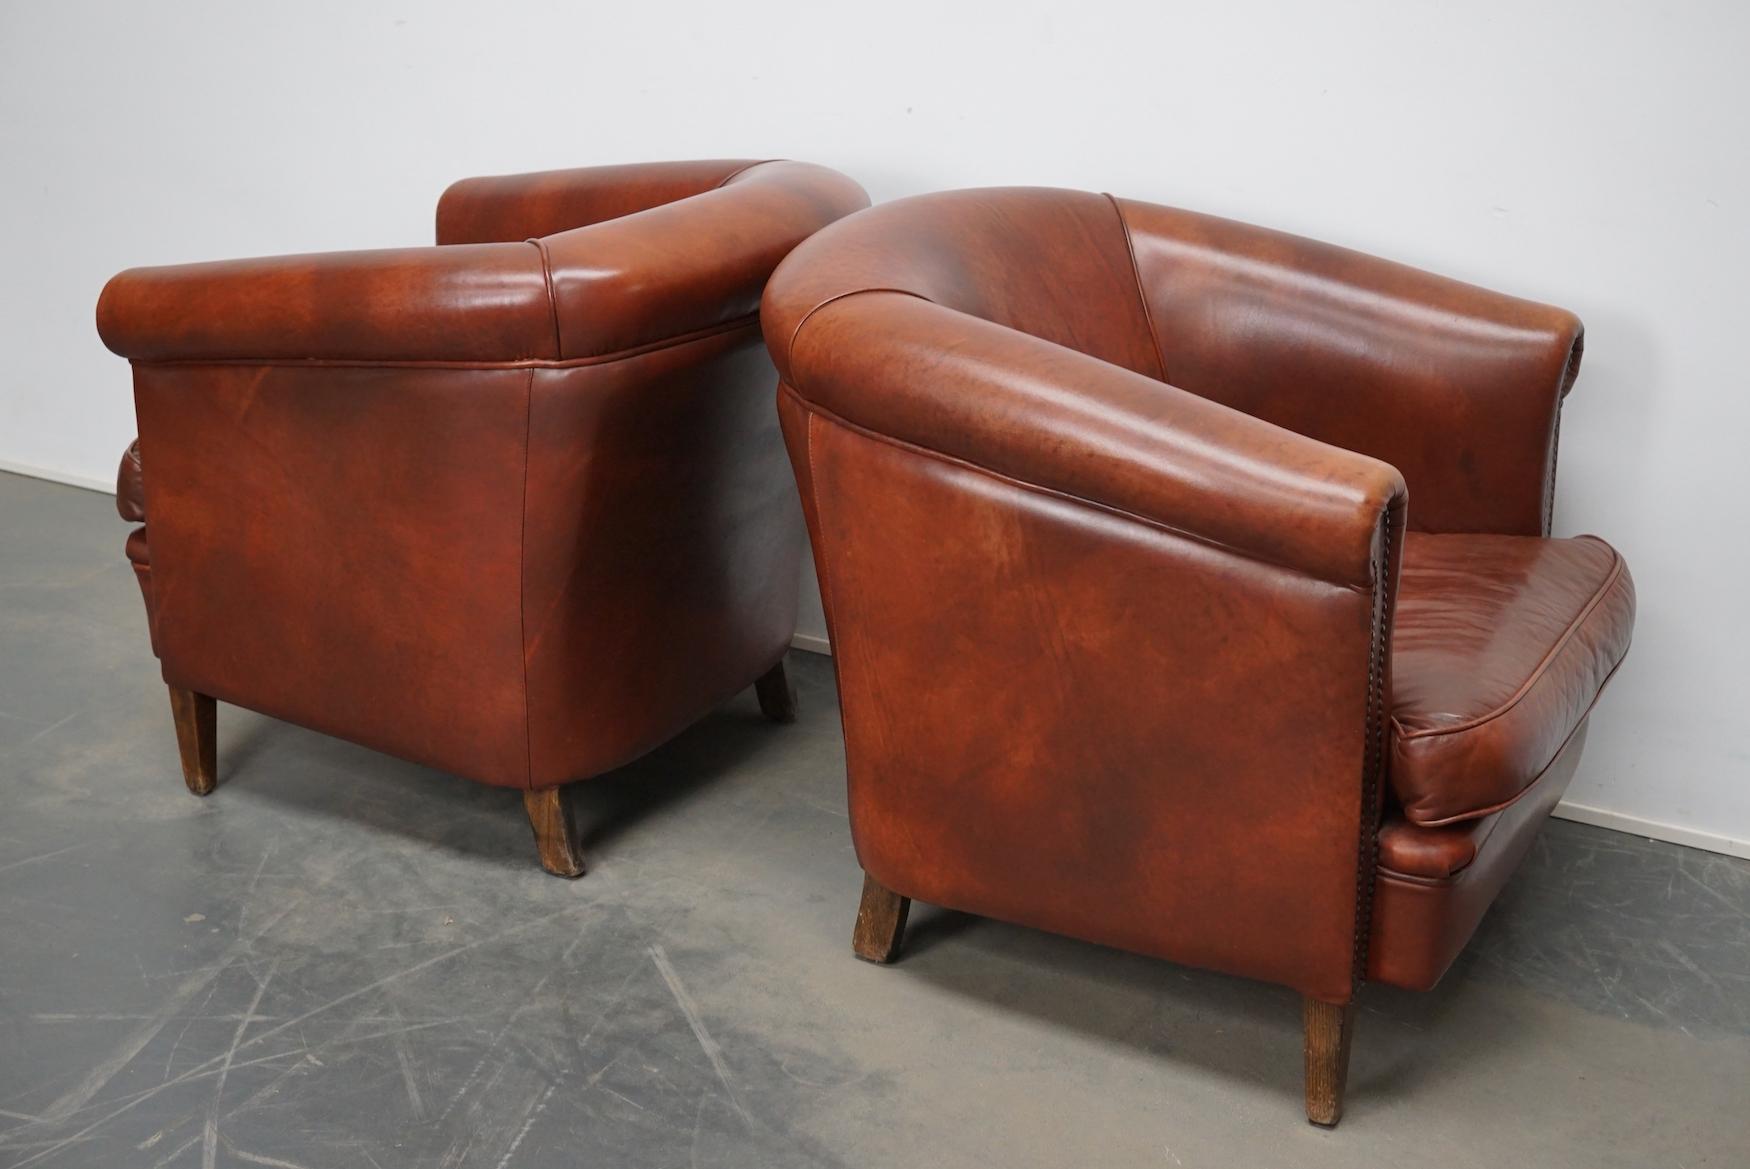 Industrial Vintage Dutch Cognac Colored Leather Club Chair, Set of 2